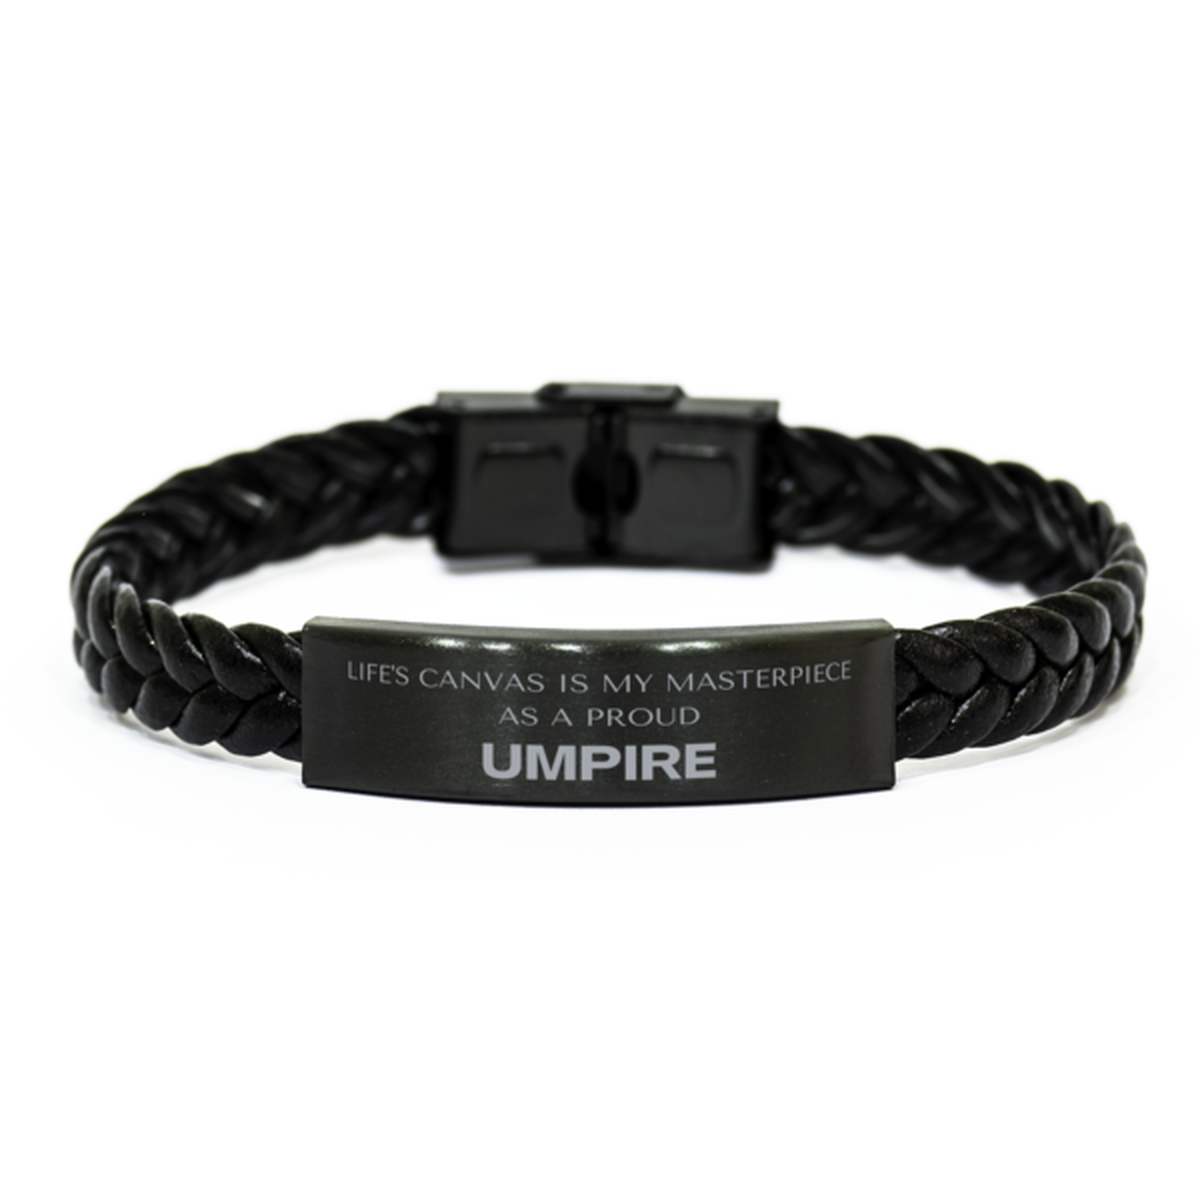 Proud Umpire Gifts, Life's canvas is my masterpiece, Epic Birthday Christmas Unique Braided Leather Bracelet For Umpire, Coworkers, Men, Women, Friends